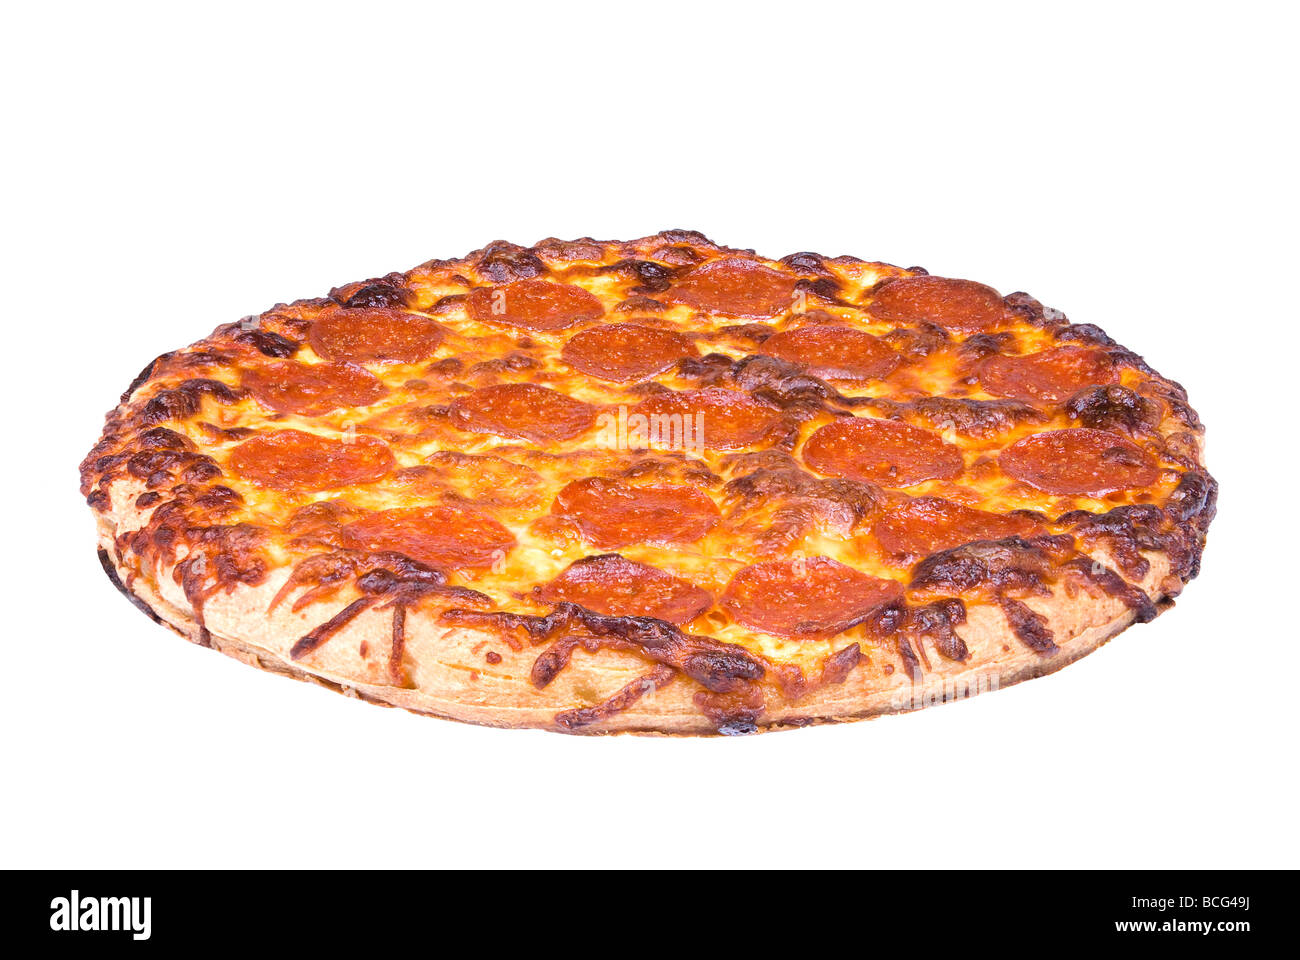 Une pizza au pepperoni et fromage tout juste sorti du four isolated on white Banque D'Images